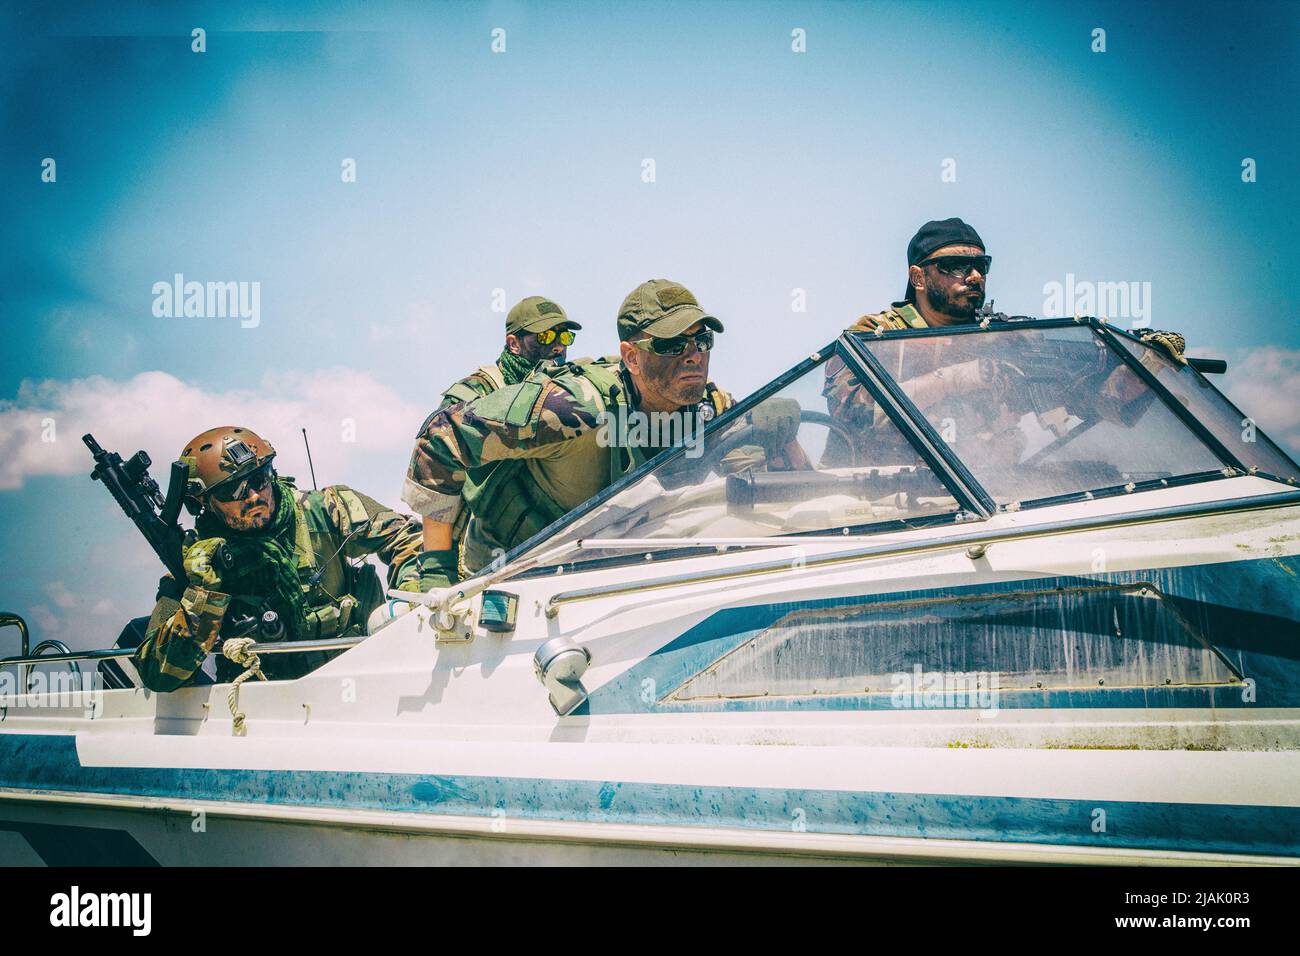 Armed Navy SEALs chasing their enemy on a boat. Stock Photo